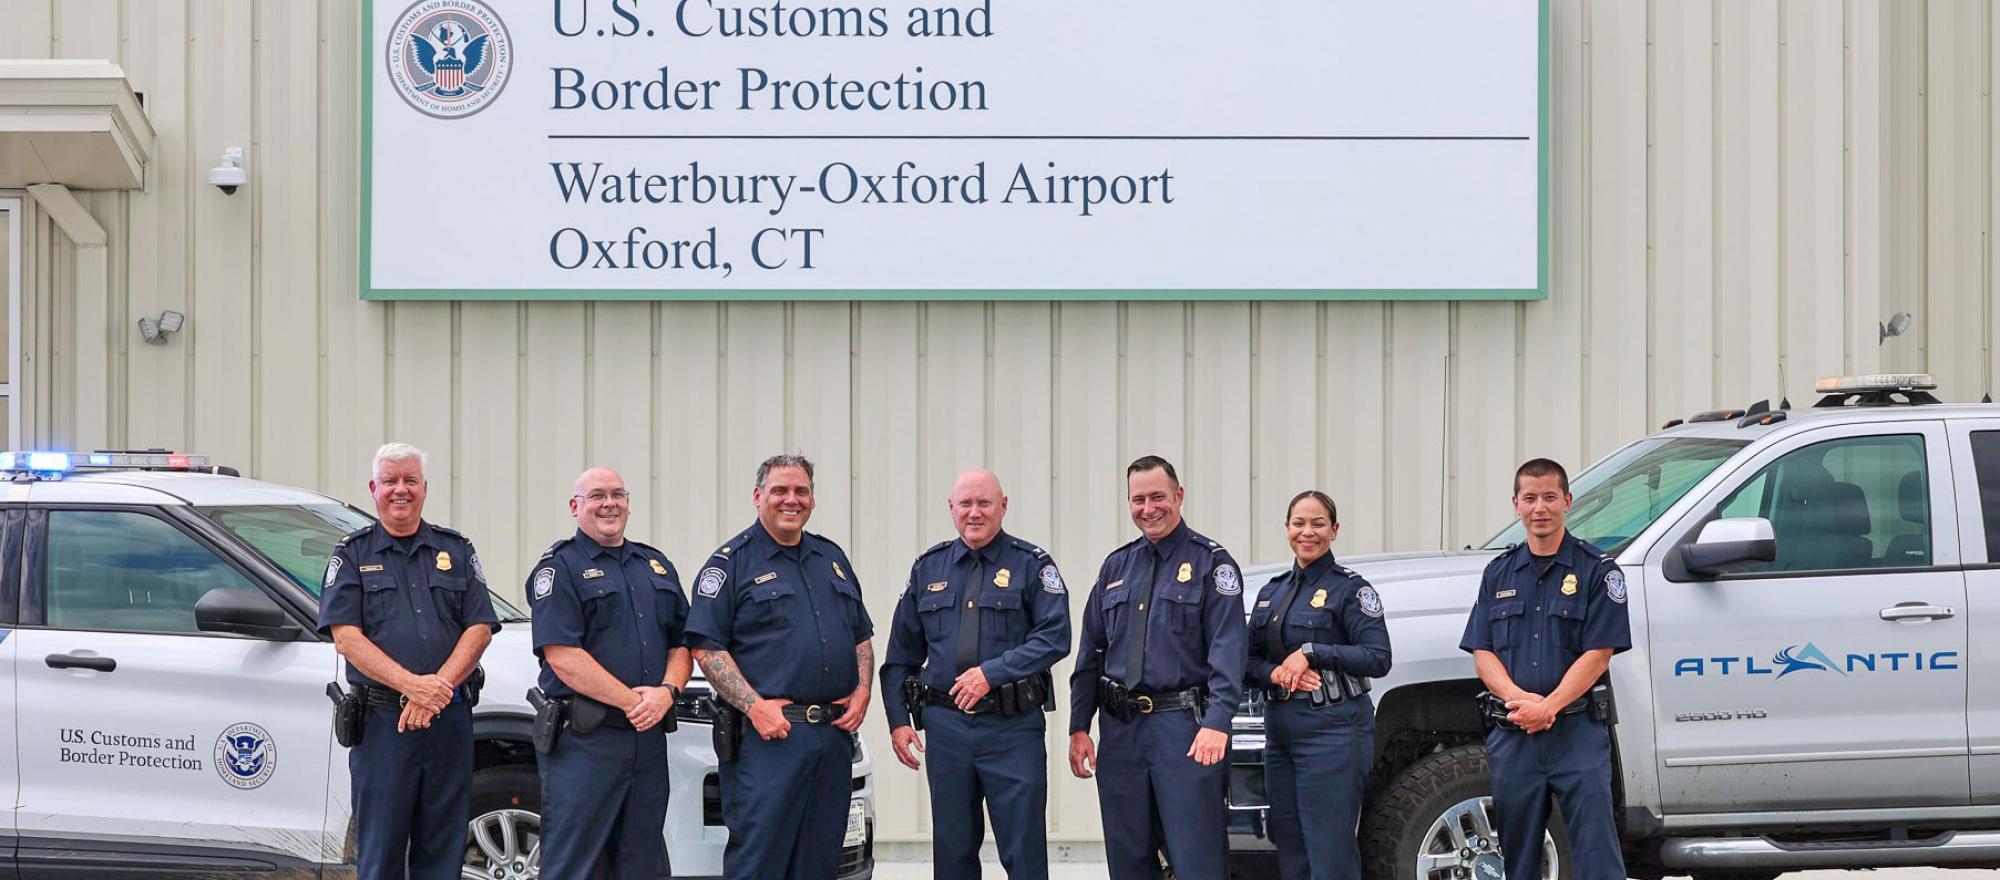 Customs and Border Protection officers outside the new CBP facility at Waterbury-Oxford Airport 